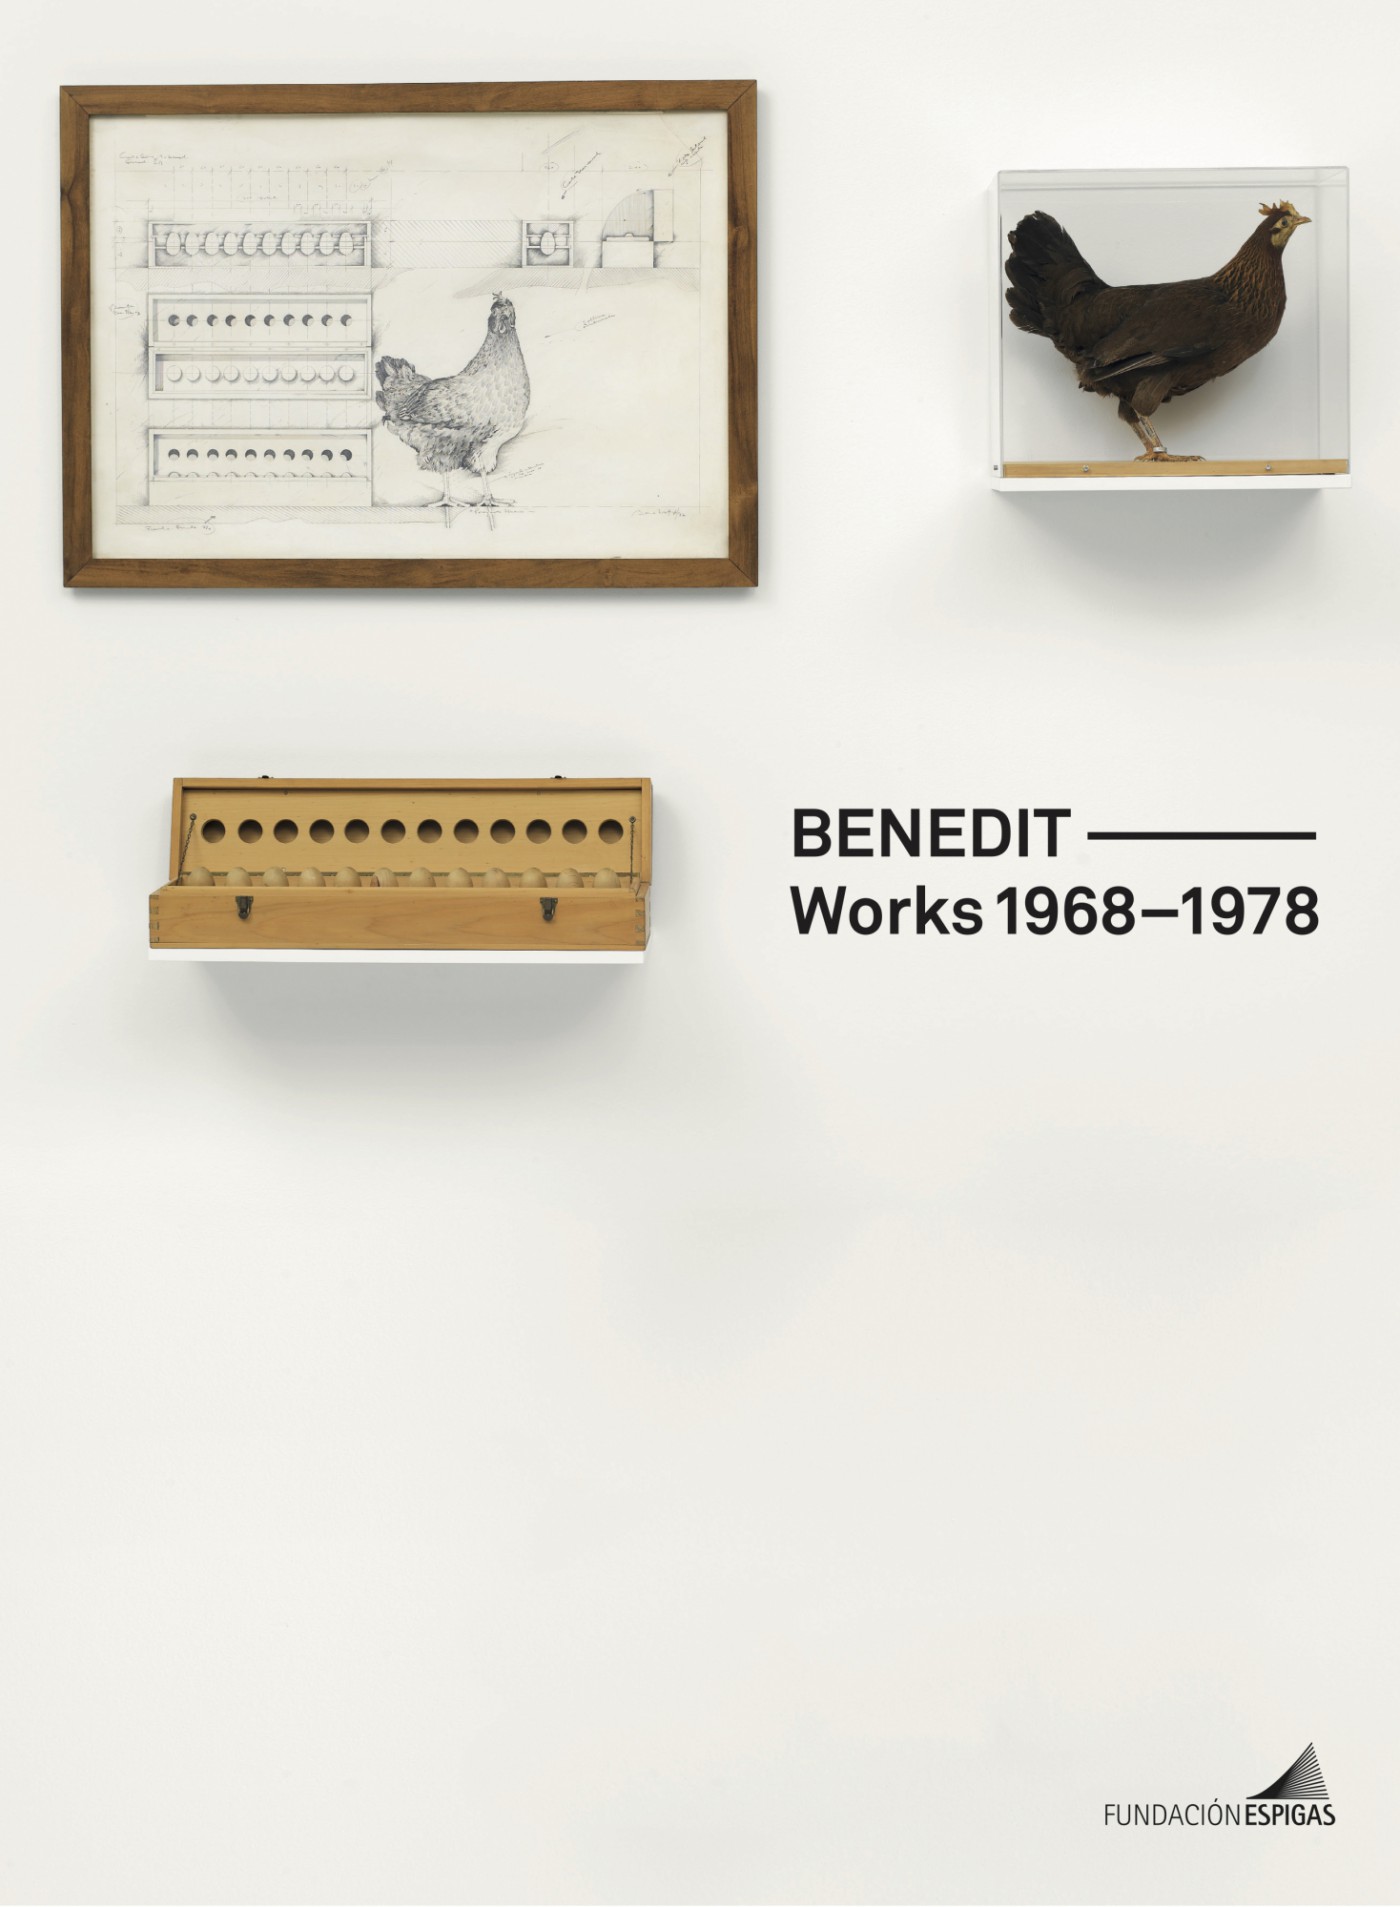 Book cover with an image of a framed drawing of a chicken placed next to a wall-mounted taxidermy chicken and a wall-mounted sculpture.